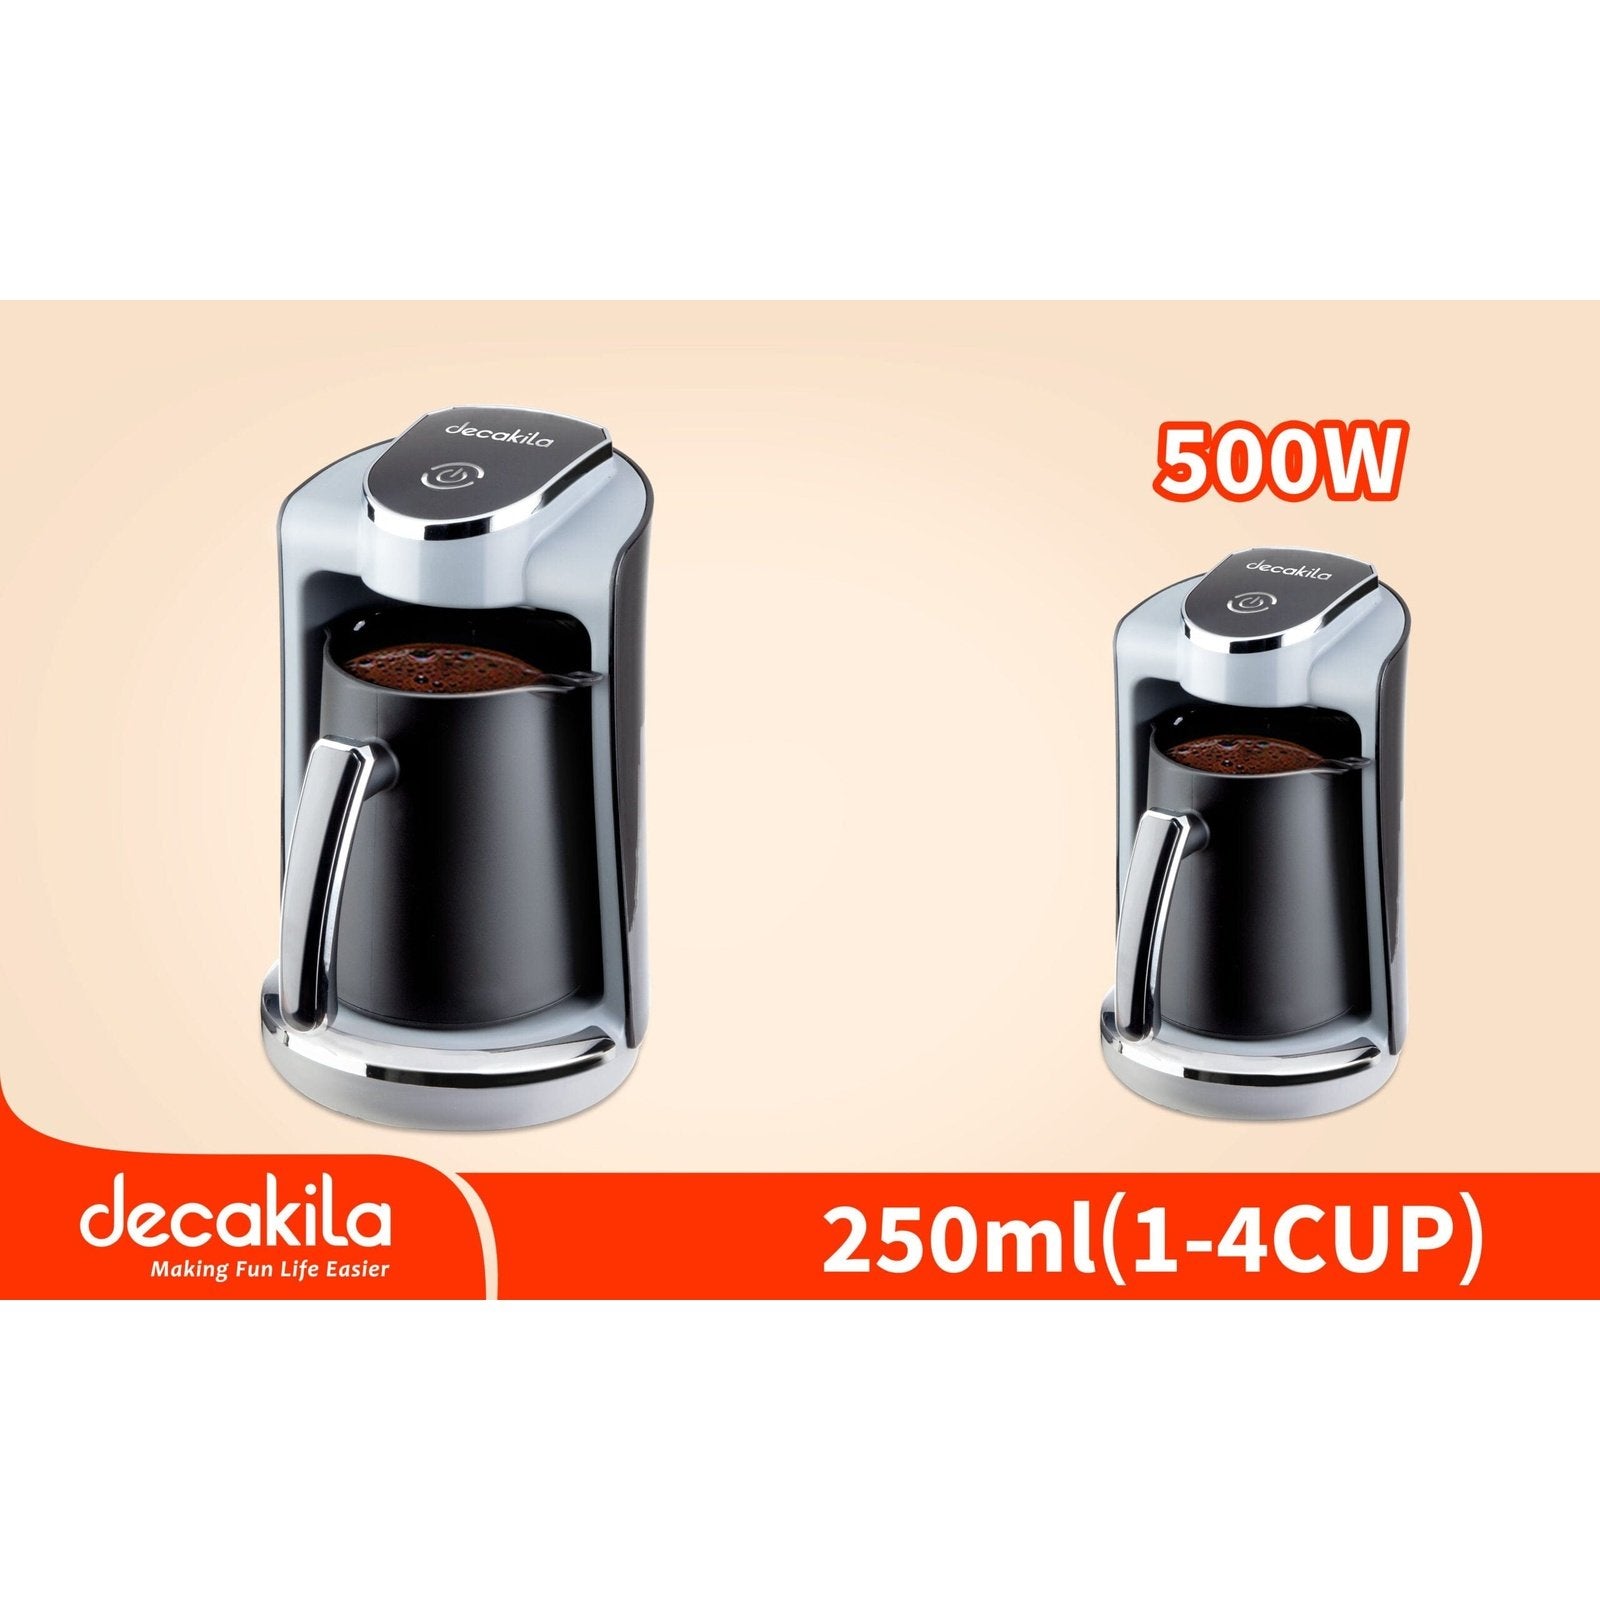 Buy Decakila Turkish Coffee Maker 500W - KECF030B in Ghana | Supply Master Kitchen Appliances Buy Tools hardware Building materials